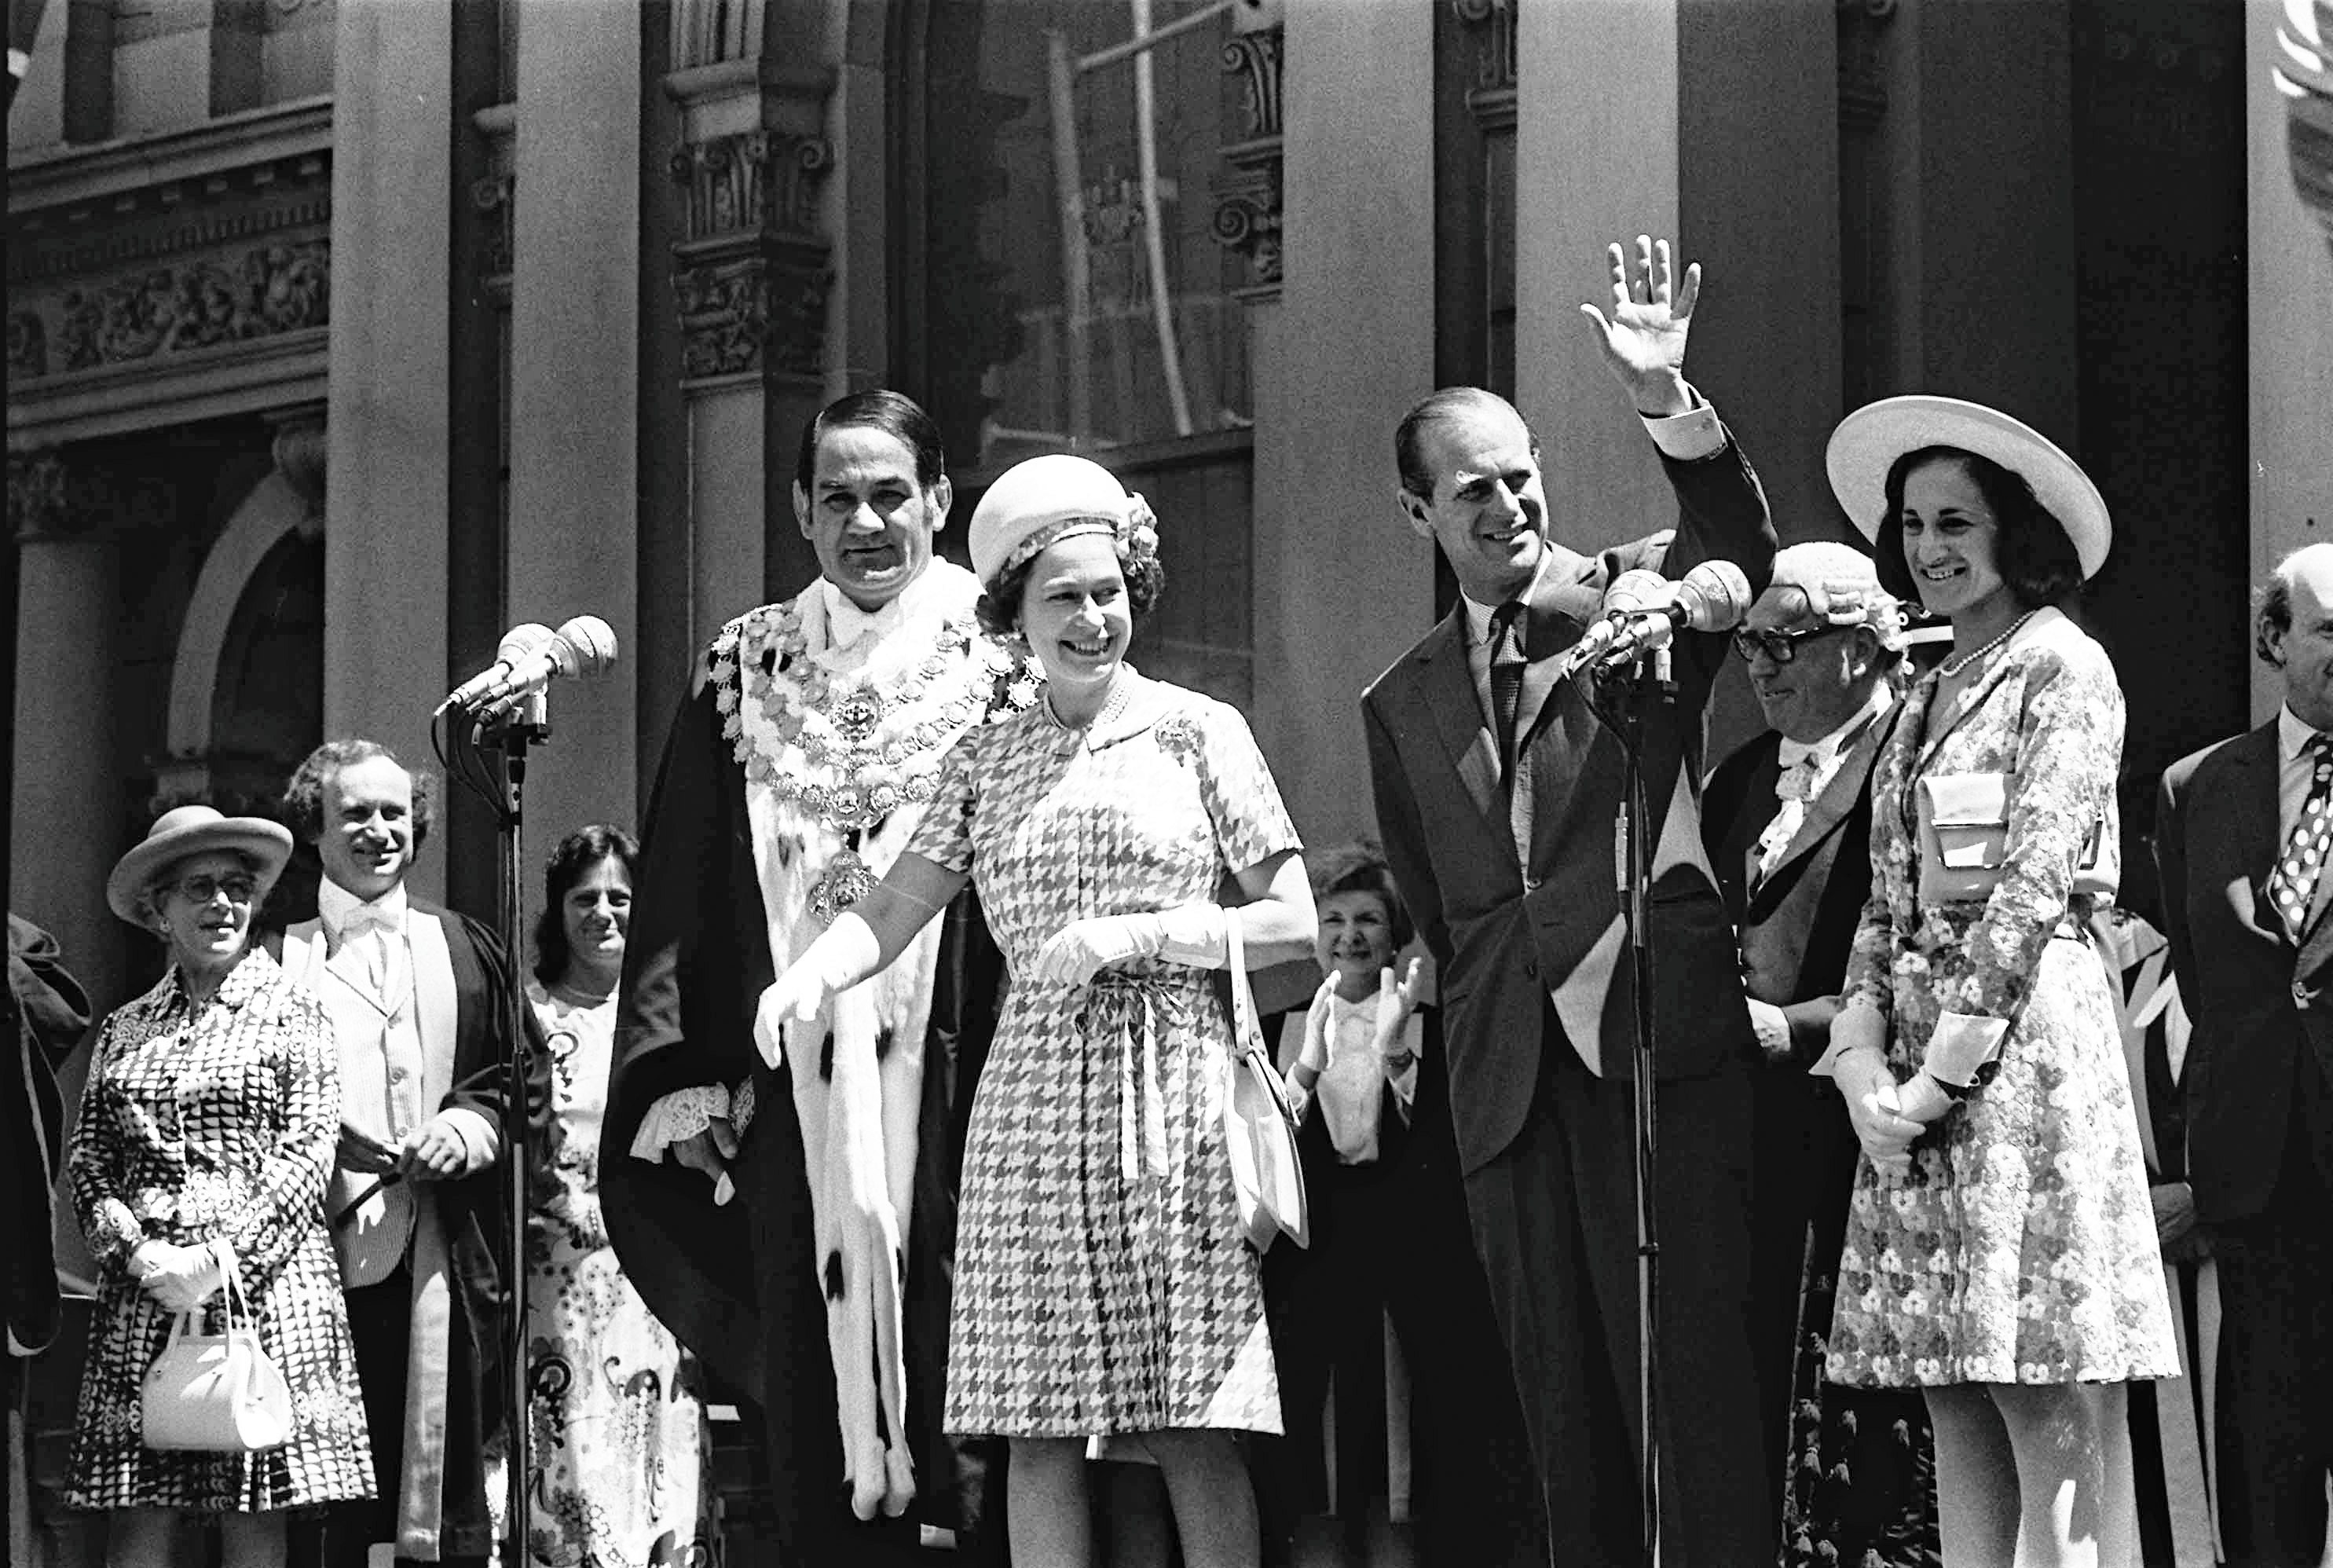 Opening of the Opera House Photograph shows the opening of the Sydney Opera House by Queen E